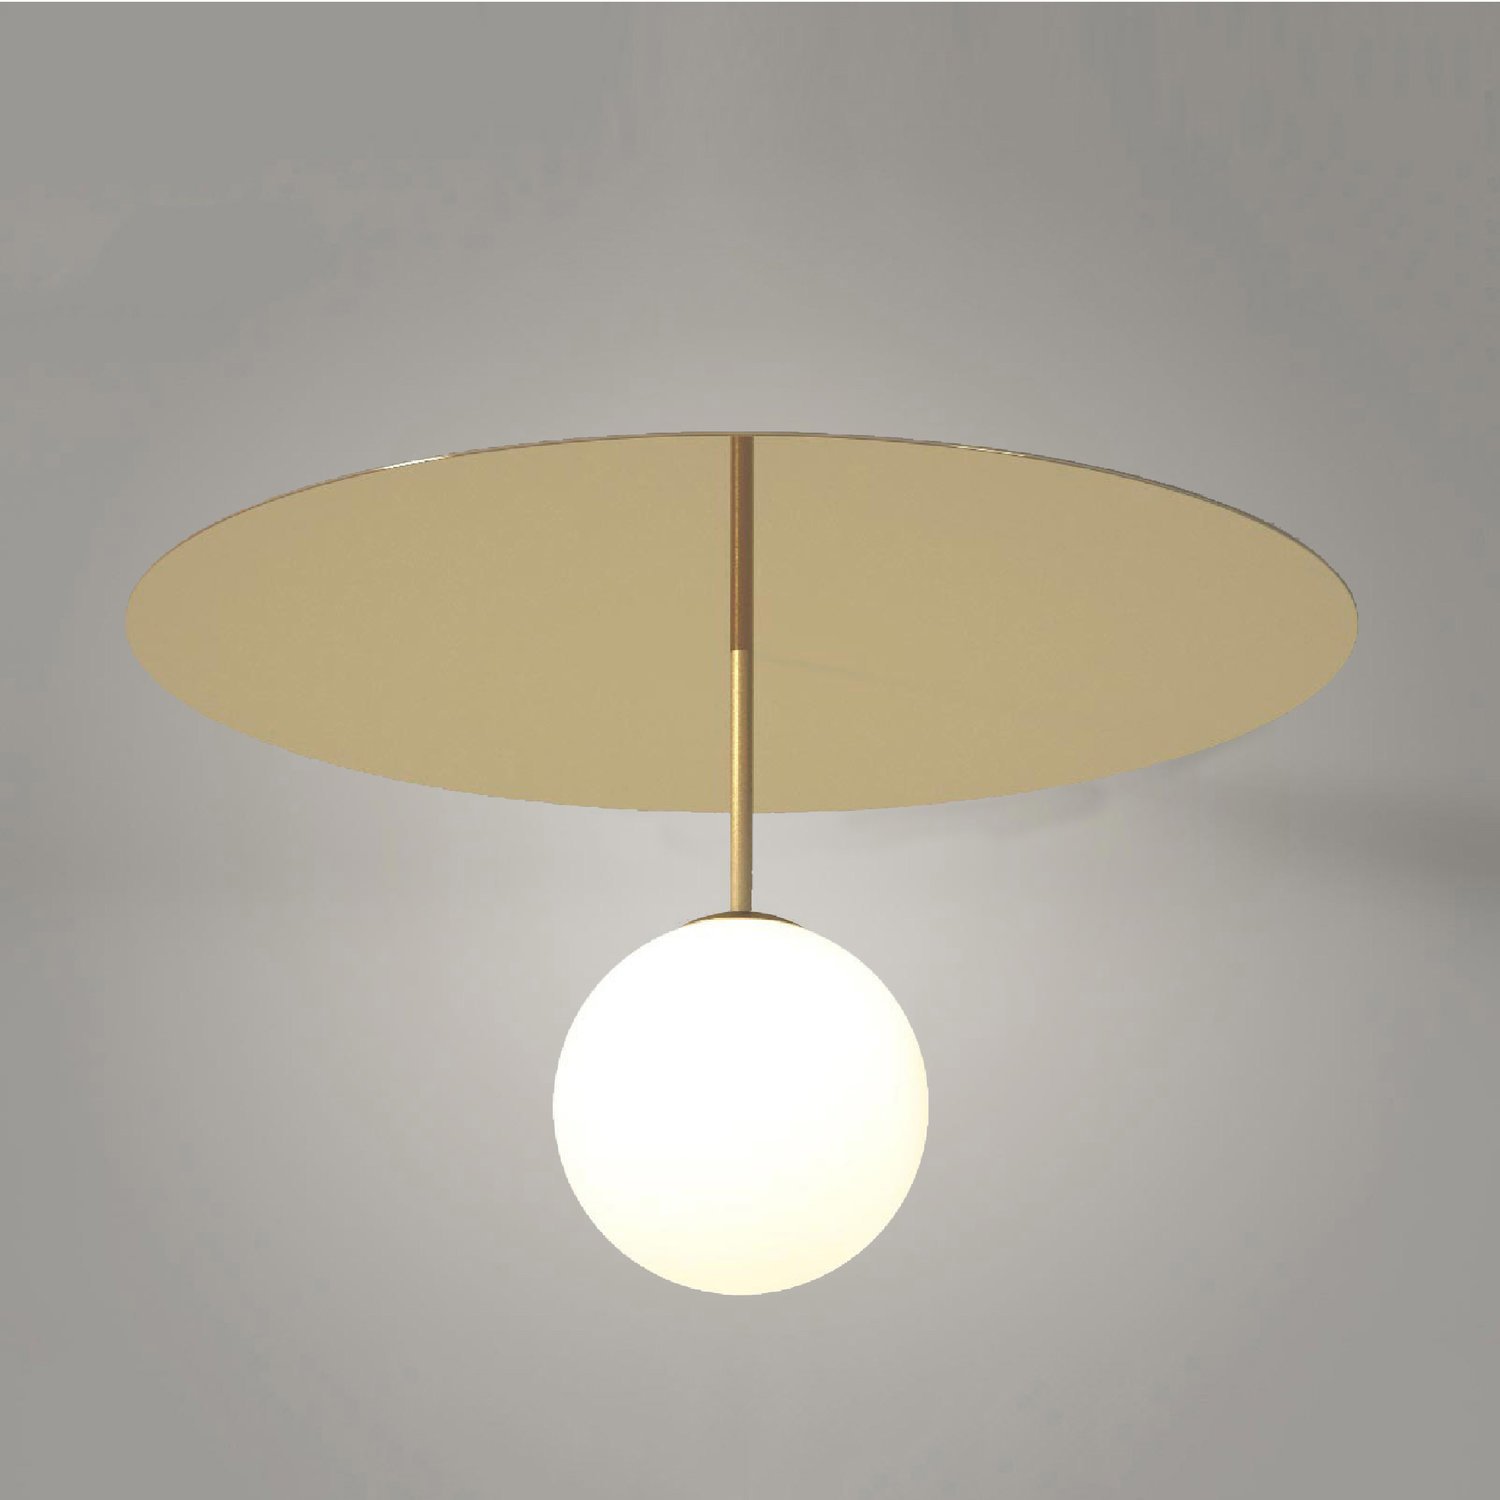 PLATE AND SPHERE CEILING LIGHT / OPTION 2 / SMALL 65cm